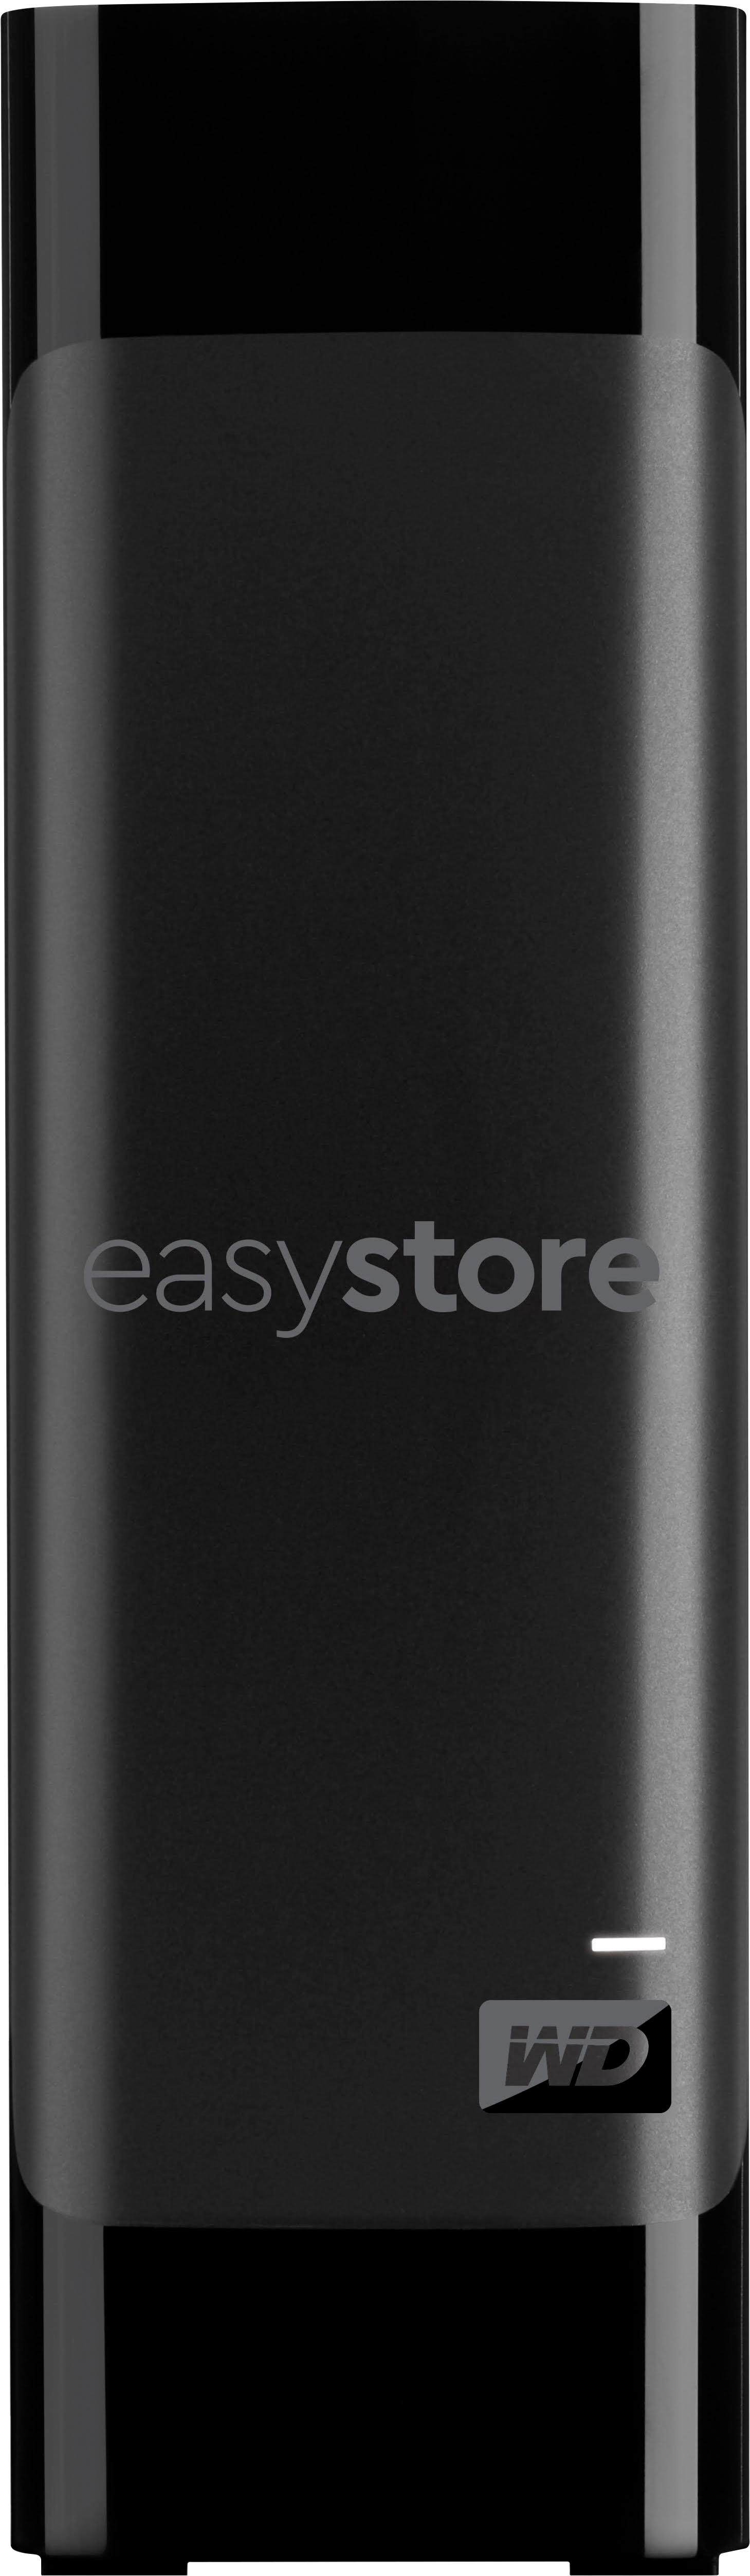 20TB WD easystore External USB 3.0 Hard Drive $330 at Best Buy